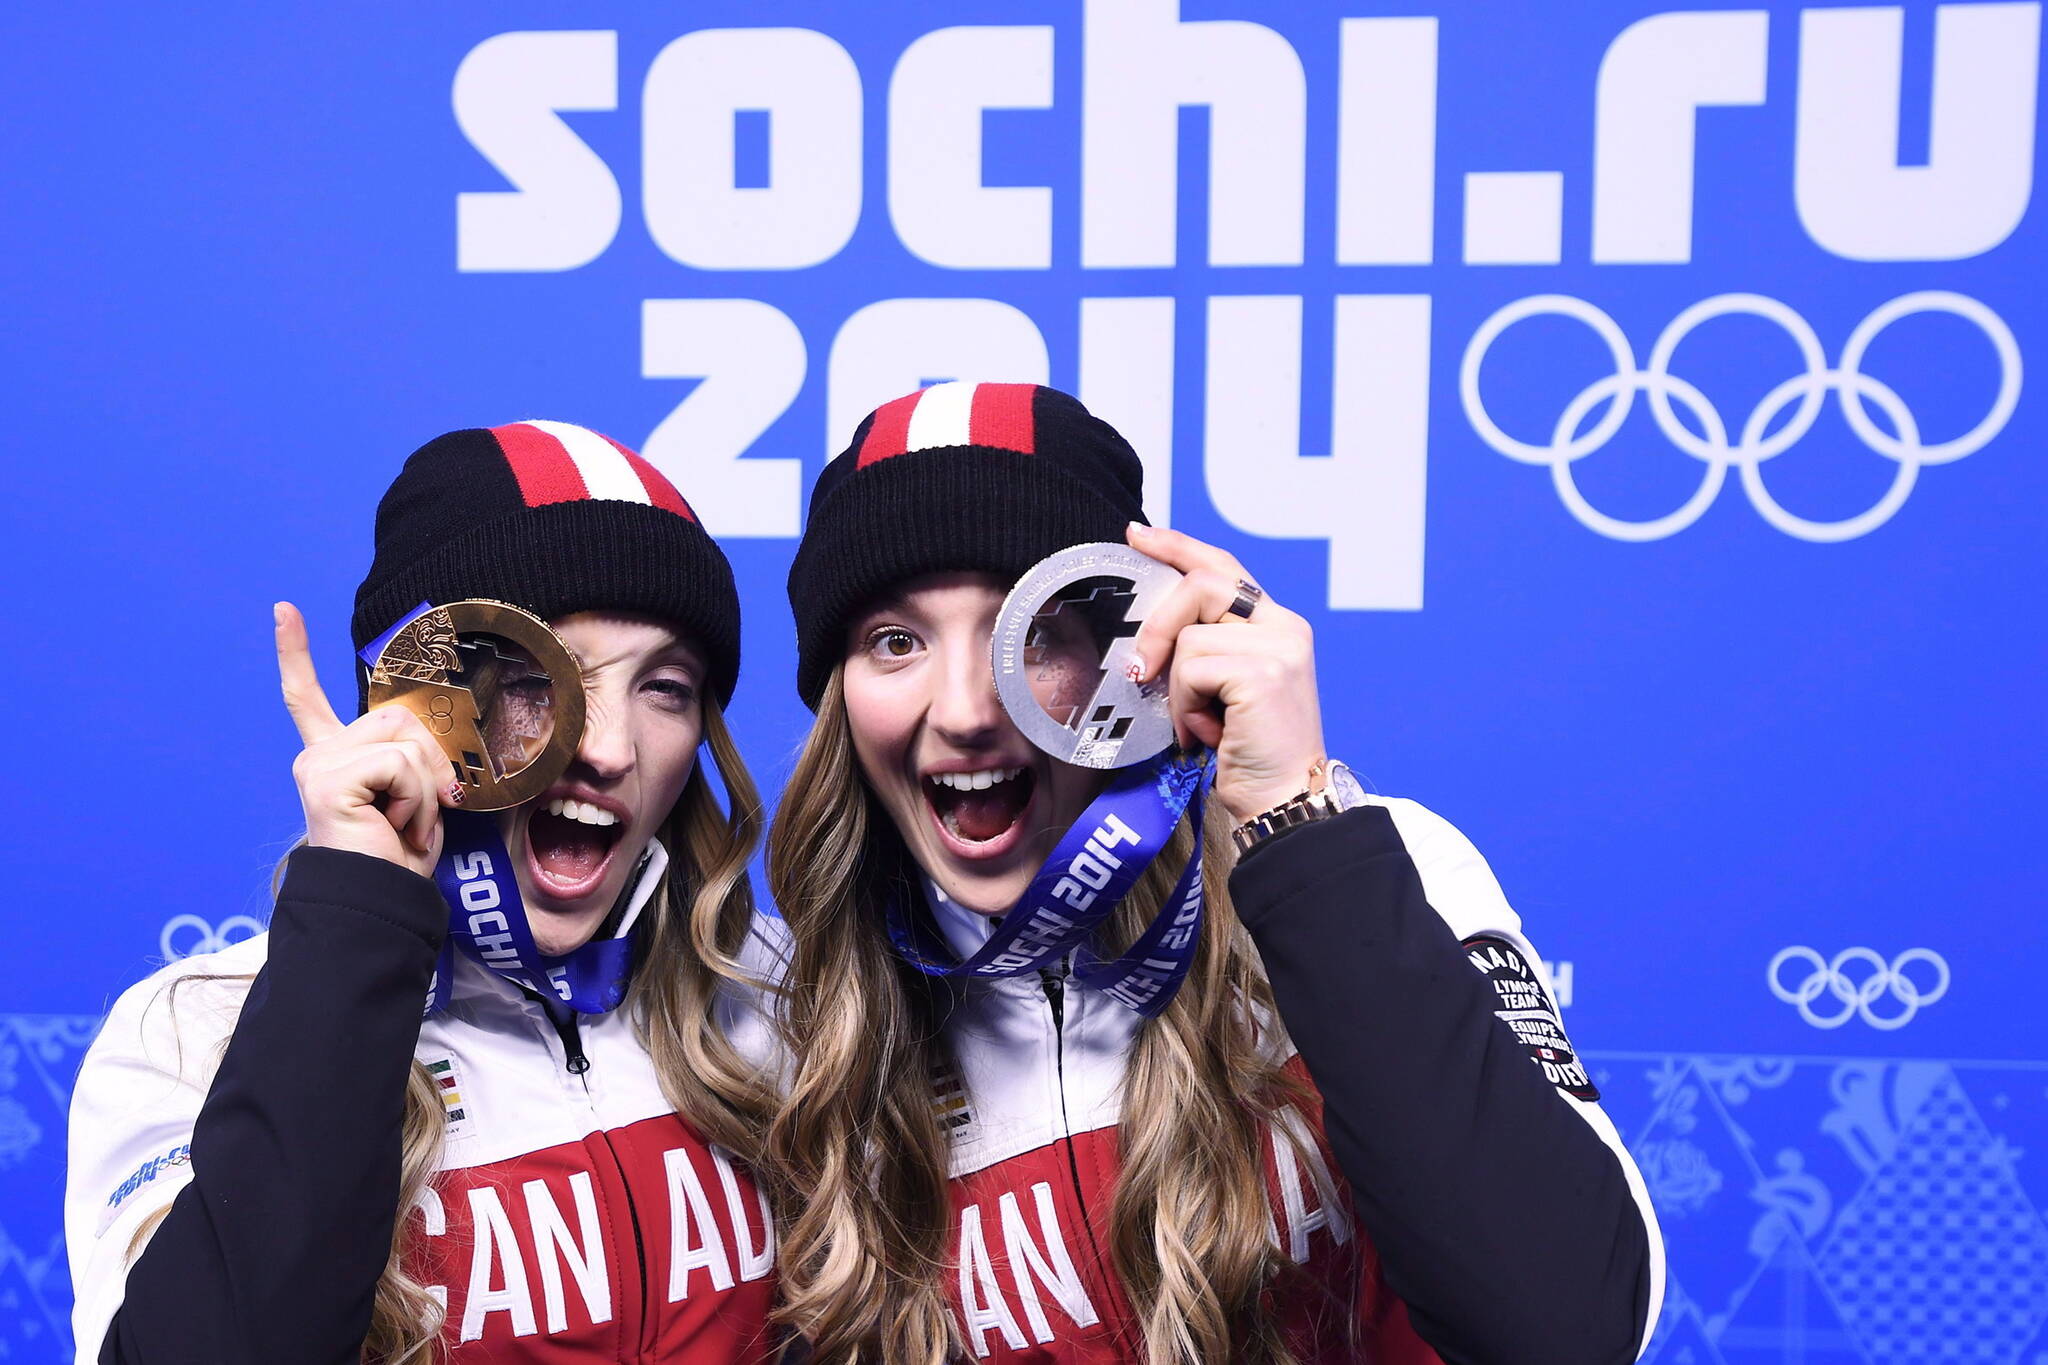 Canadian sisters Justine Dufour-Lapointe, left, and Chloe Dufour-Lapointe, right, show off their gold and silver medals from women’s freestyle moguls after the medal ceremony at the 2014 Sochi Winter Olympics in Sochi, Russia on Sunday, February 9, 2014.THE CANADIAN PRESS/Nathan Denette